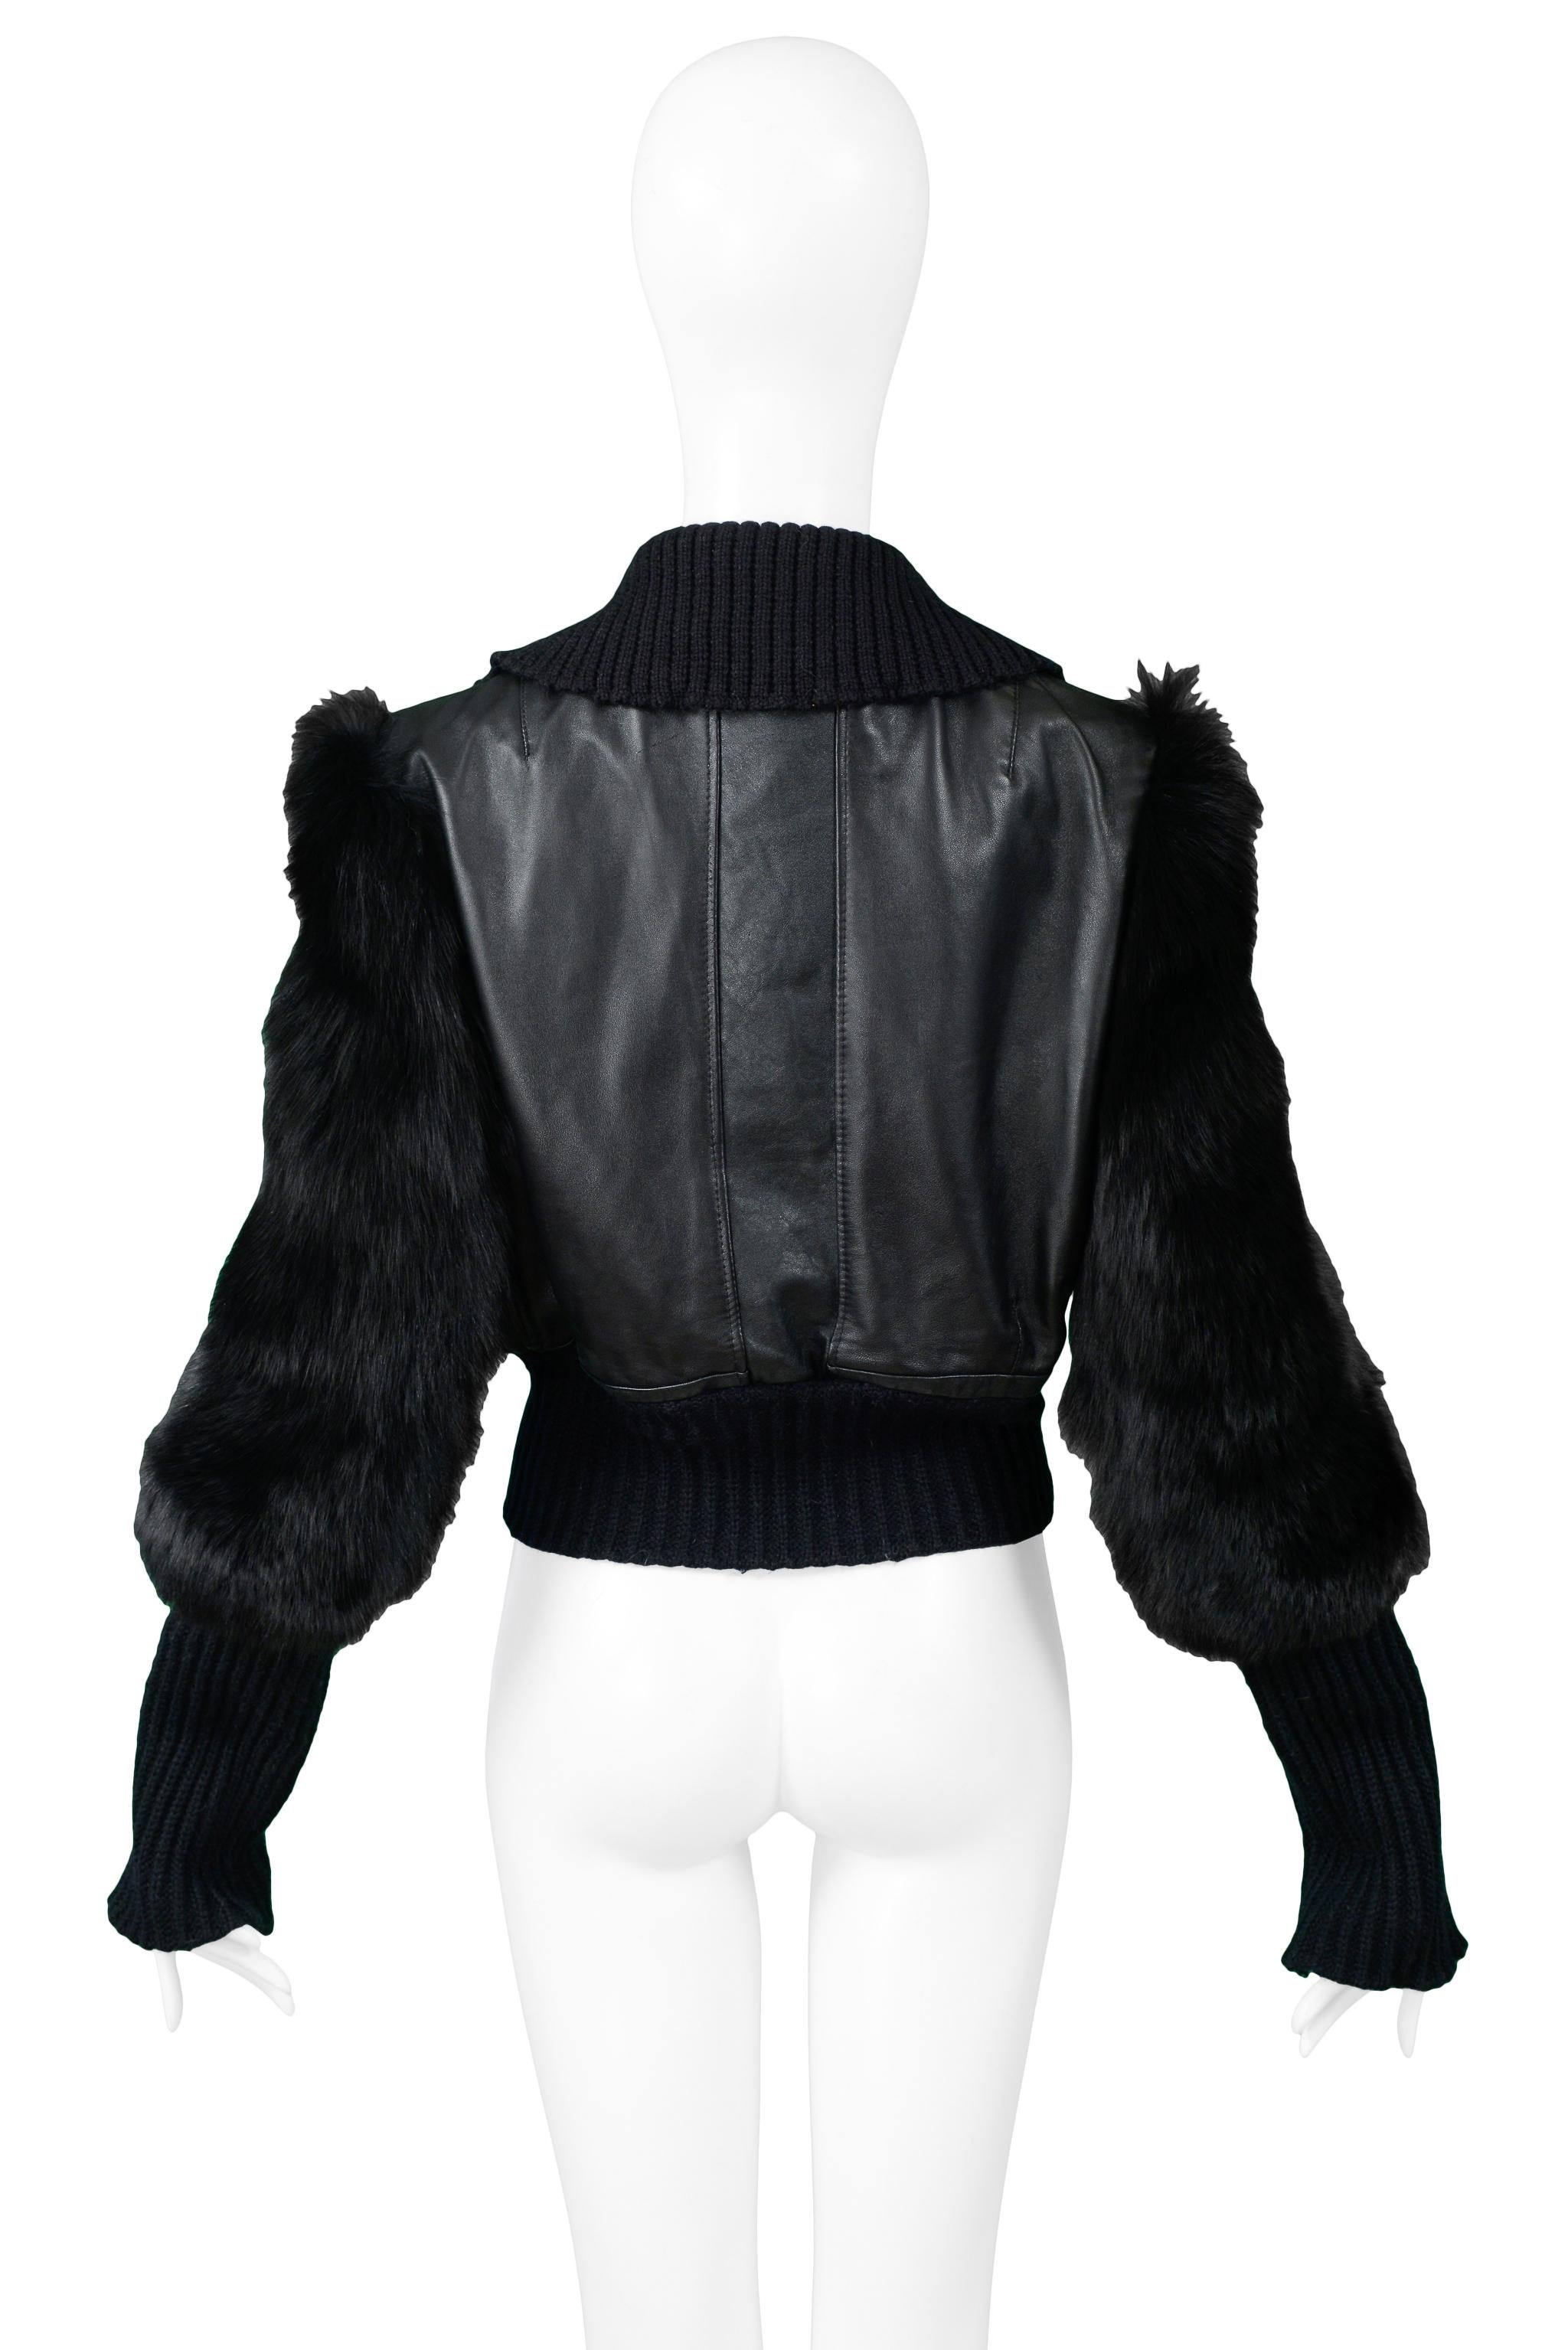 Gucci By Tom Ford Leather & Fox Fur Jacket 2003 For Sale 1